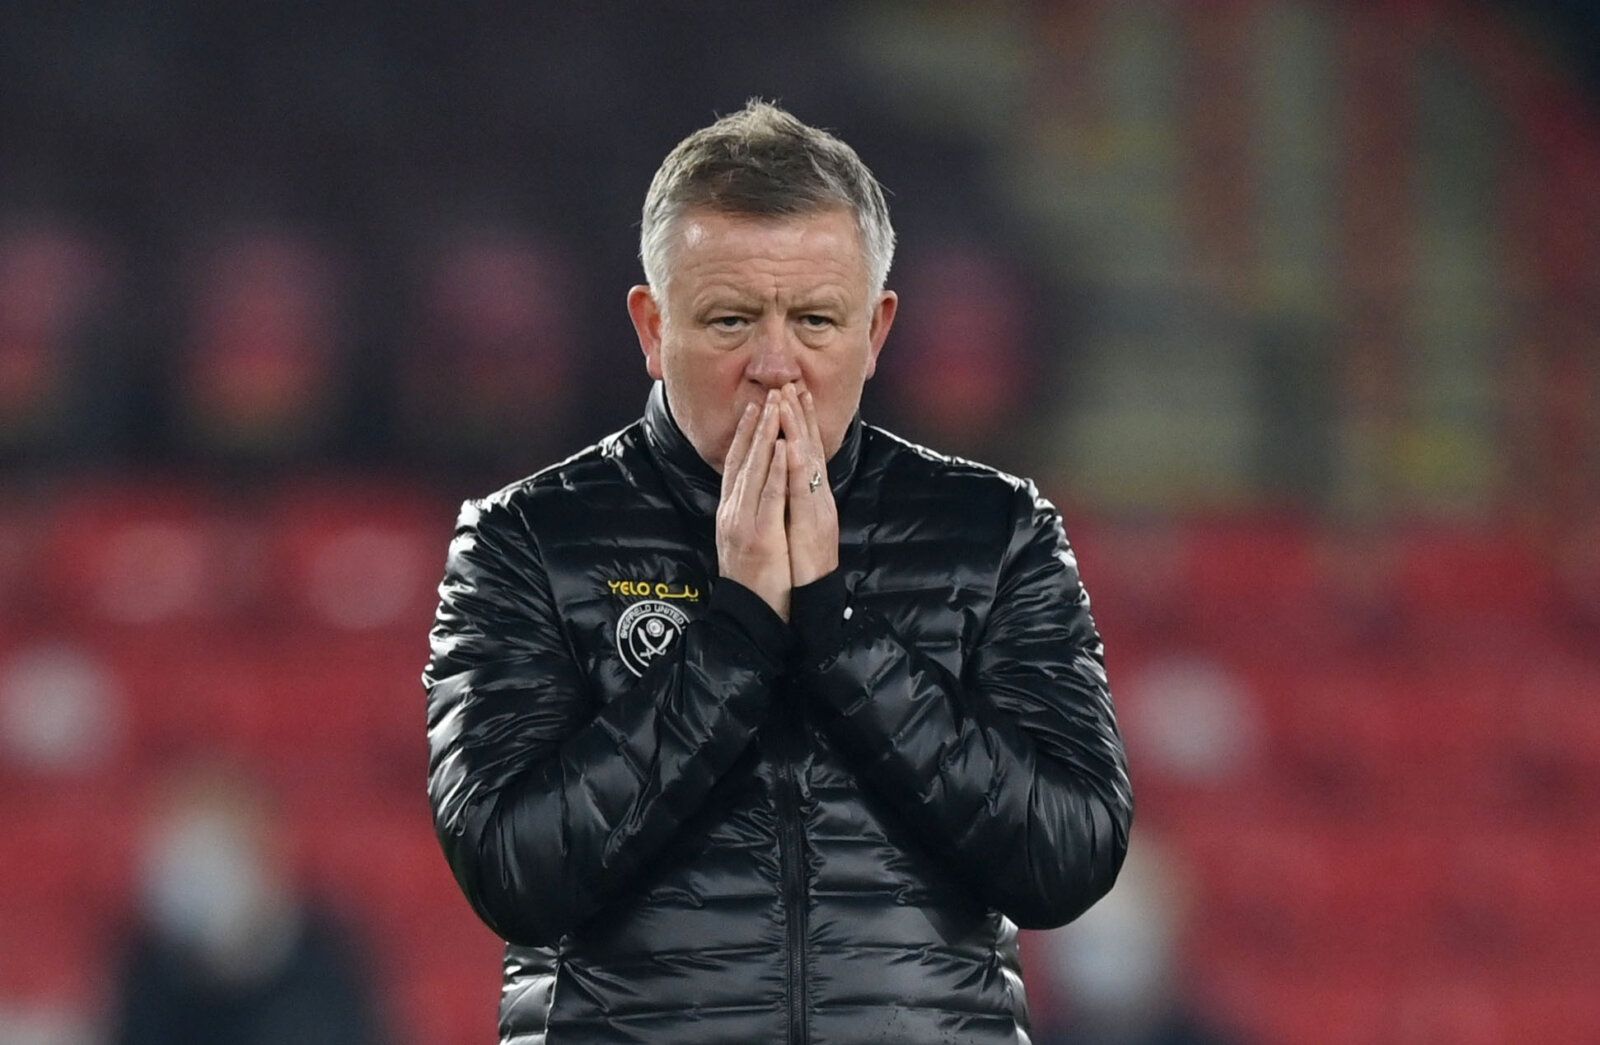 Soccer Football - Premier League - Sheffield United v Liverpool - Bramall Lane, Sheffield, Britain - February 28, 2021 Sheffield United manager Chris Wilder during the warm up before the match Pool via REUTERS/Shaun Botterill EDITORIAL USE ONLY. No use with unauthorized audio, video, data, fixture lists, club/league logos or 'live' services. Online in-match use limited to 75 images, no video emulation. No use in betting, games or single club /league/player publications.  Please contact your acco